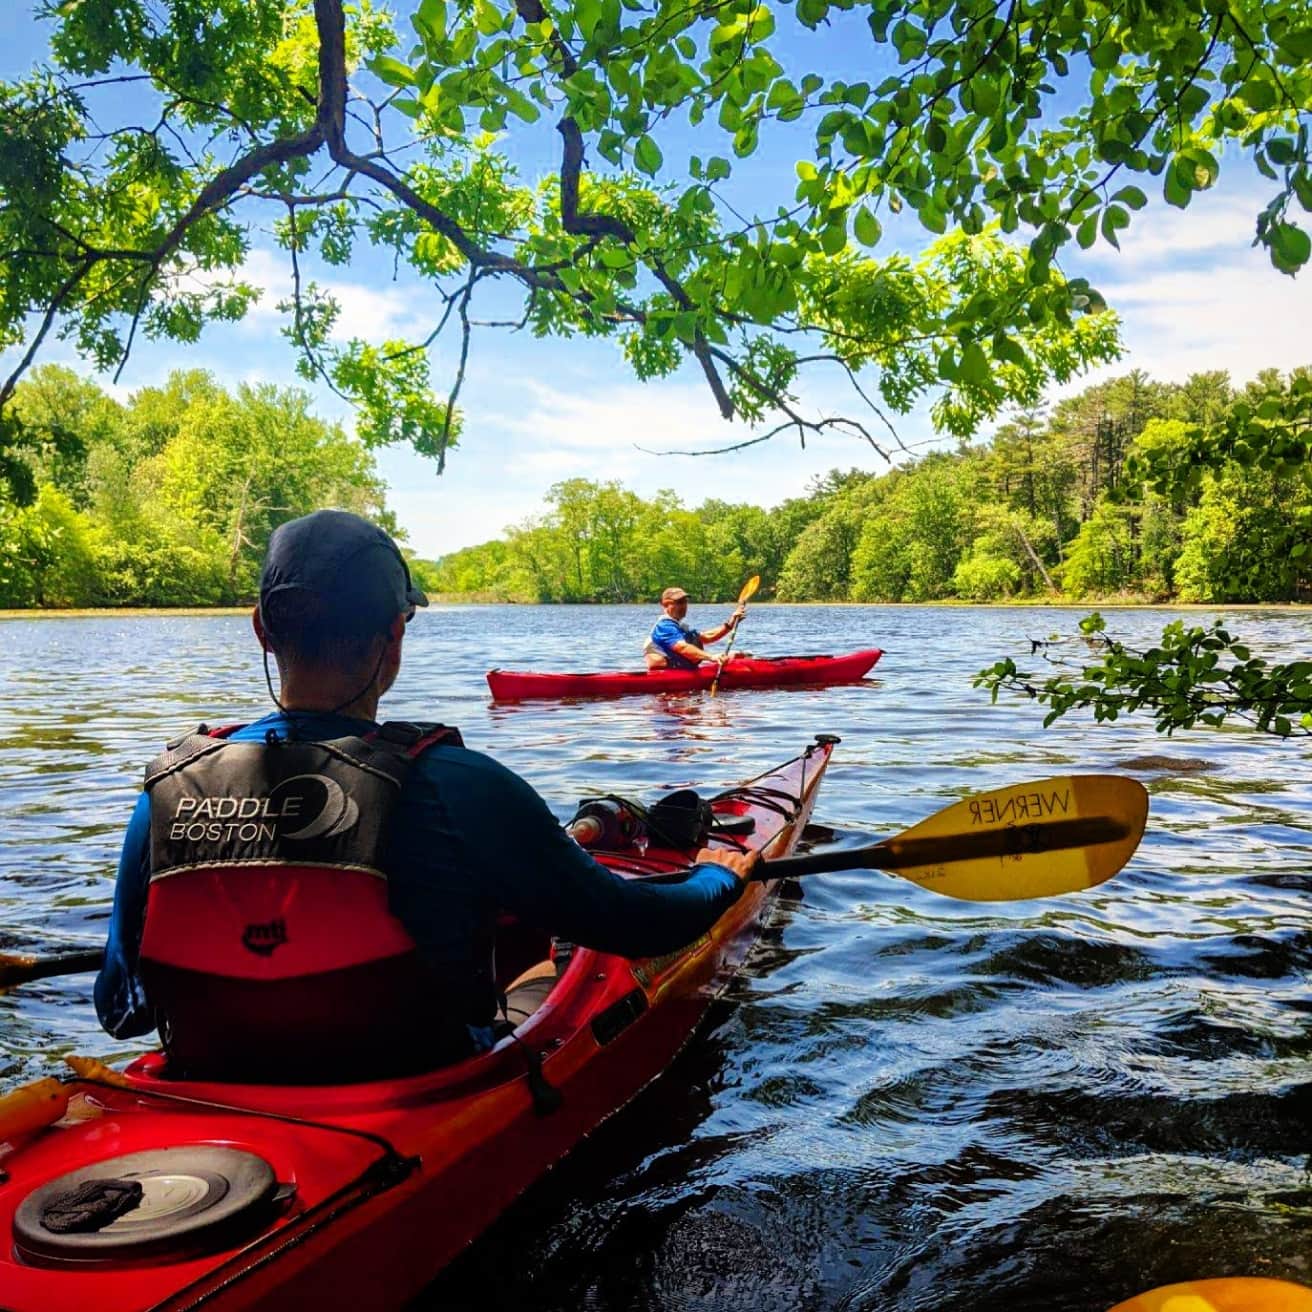 A kayaking instructor watches another kayaker paddle by.